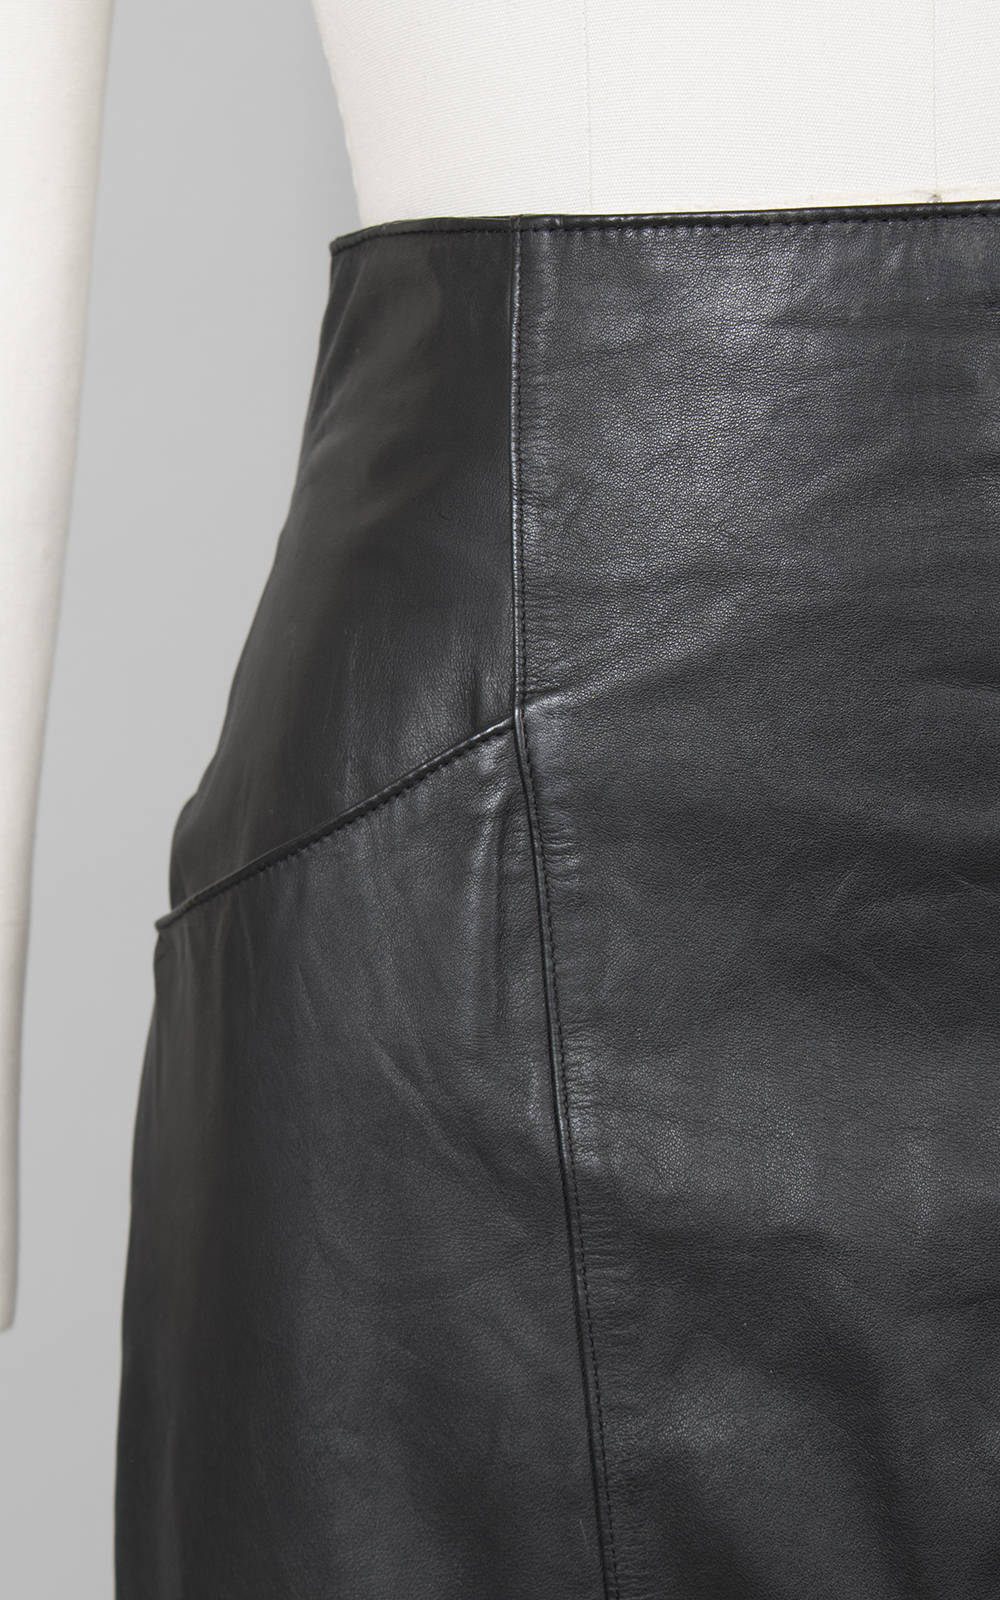 Vintage 1980s Skirt | 80s Black Leather Pencil Skirt Buttery Soft Leather Wiggle w/ High Back Slit & Pockets (small)